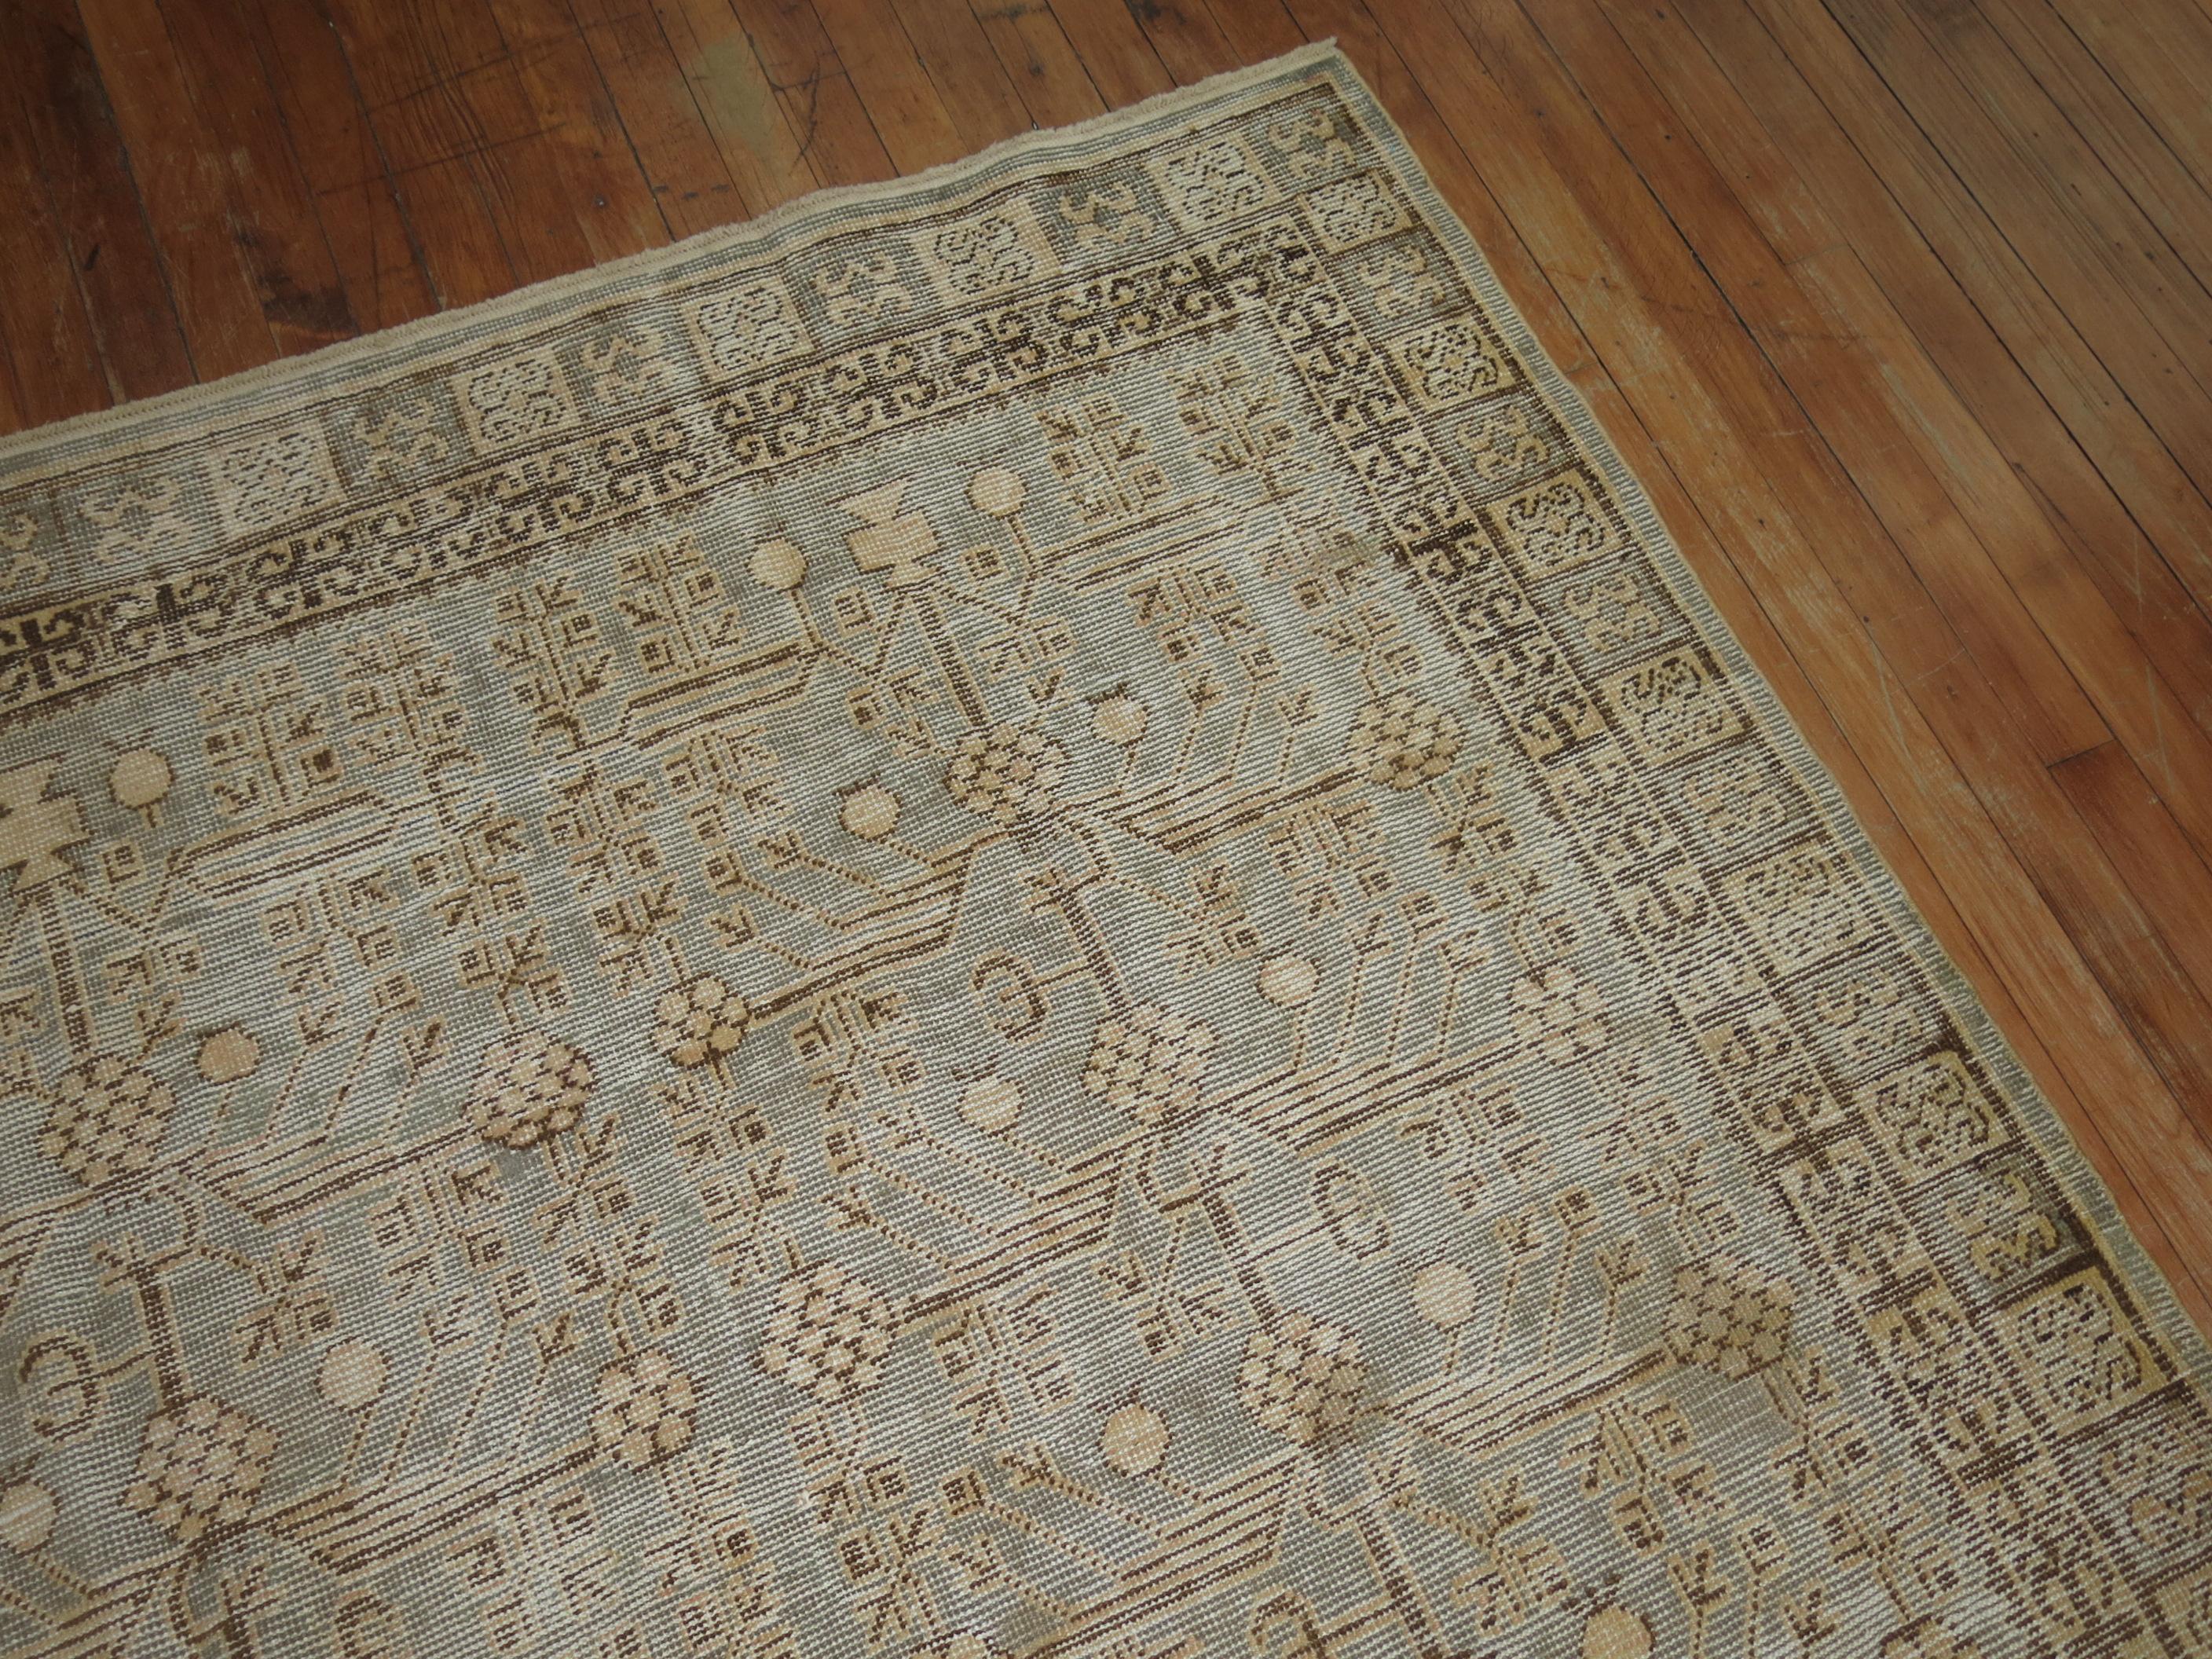 Hand-Woven Khotan Rug in Celadon Green and Brown